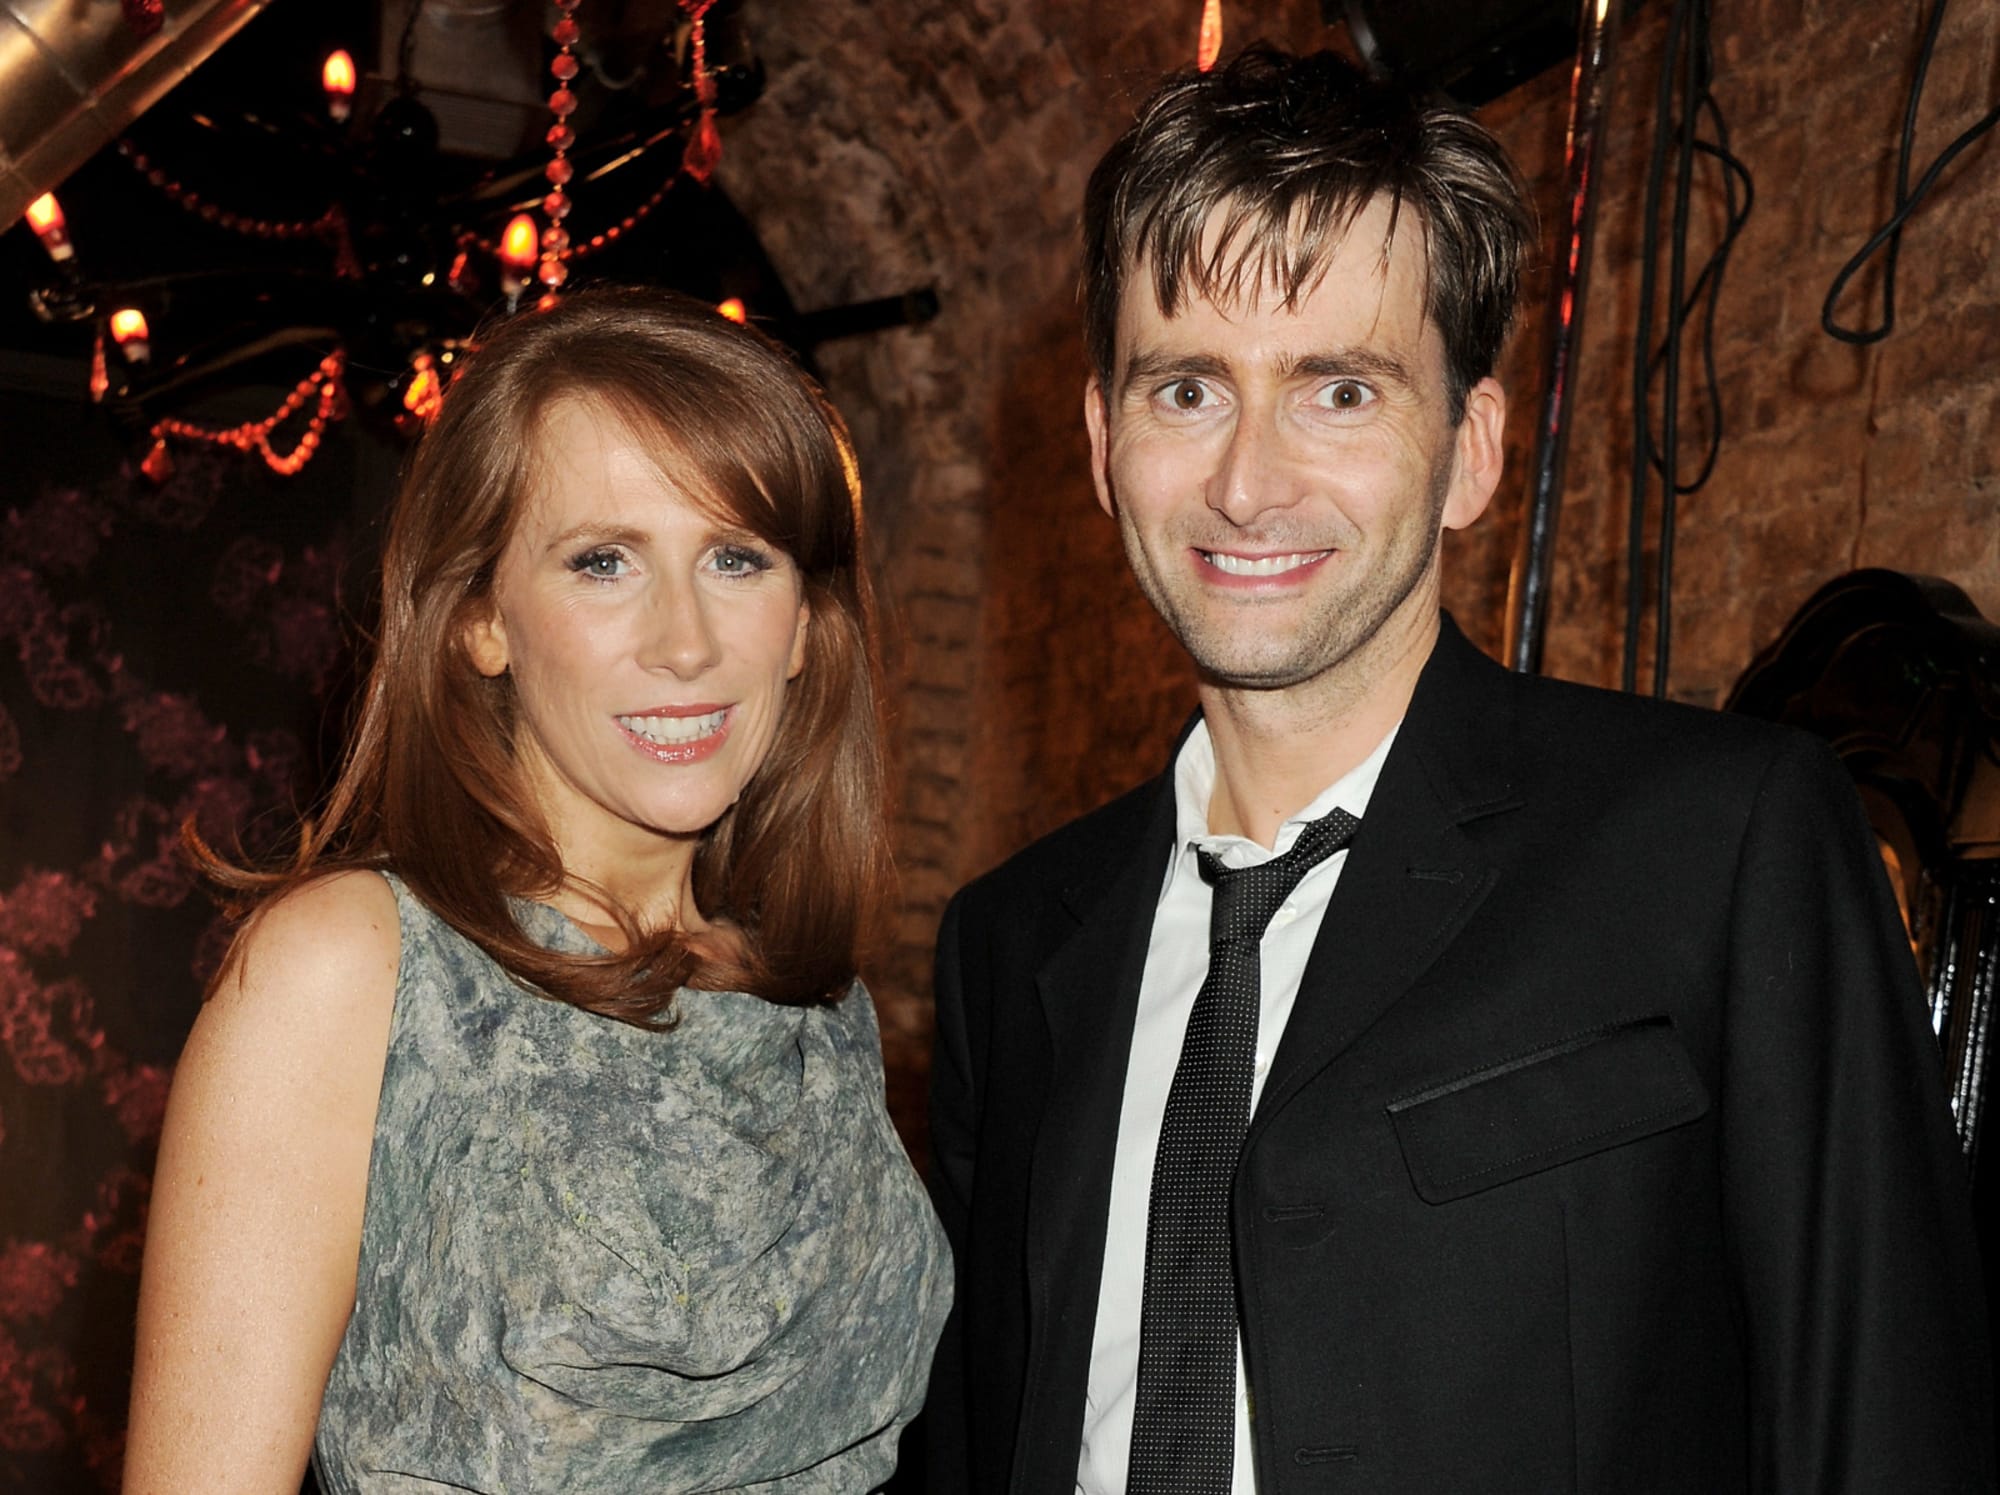 Russell T. Davies teases details of David Tennant’s Doctor Who return